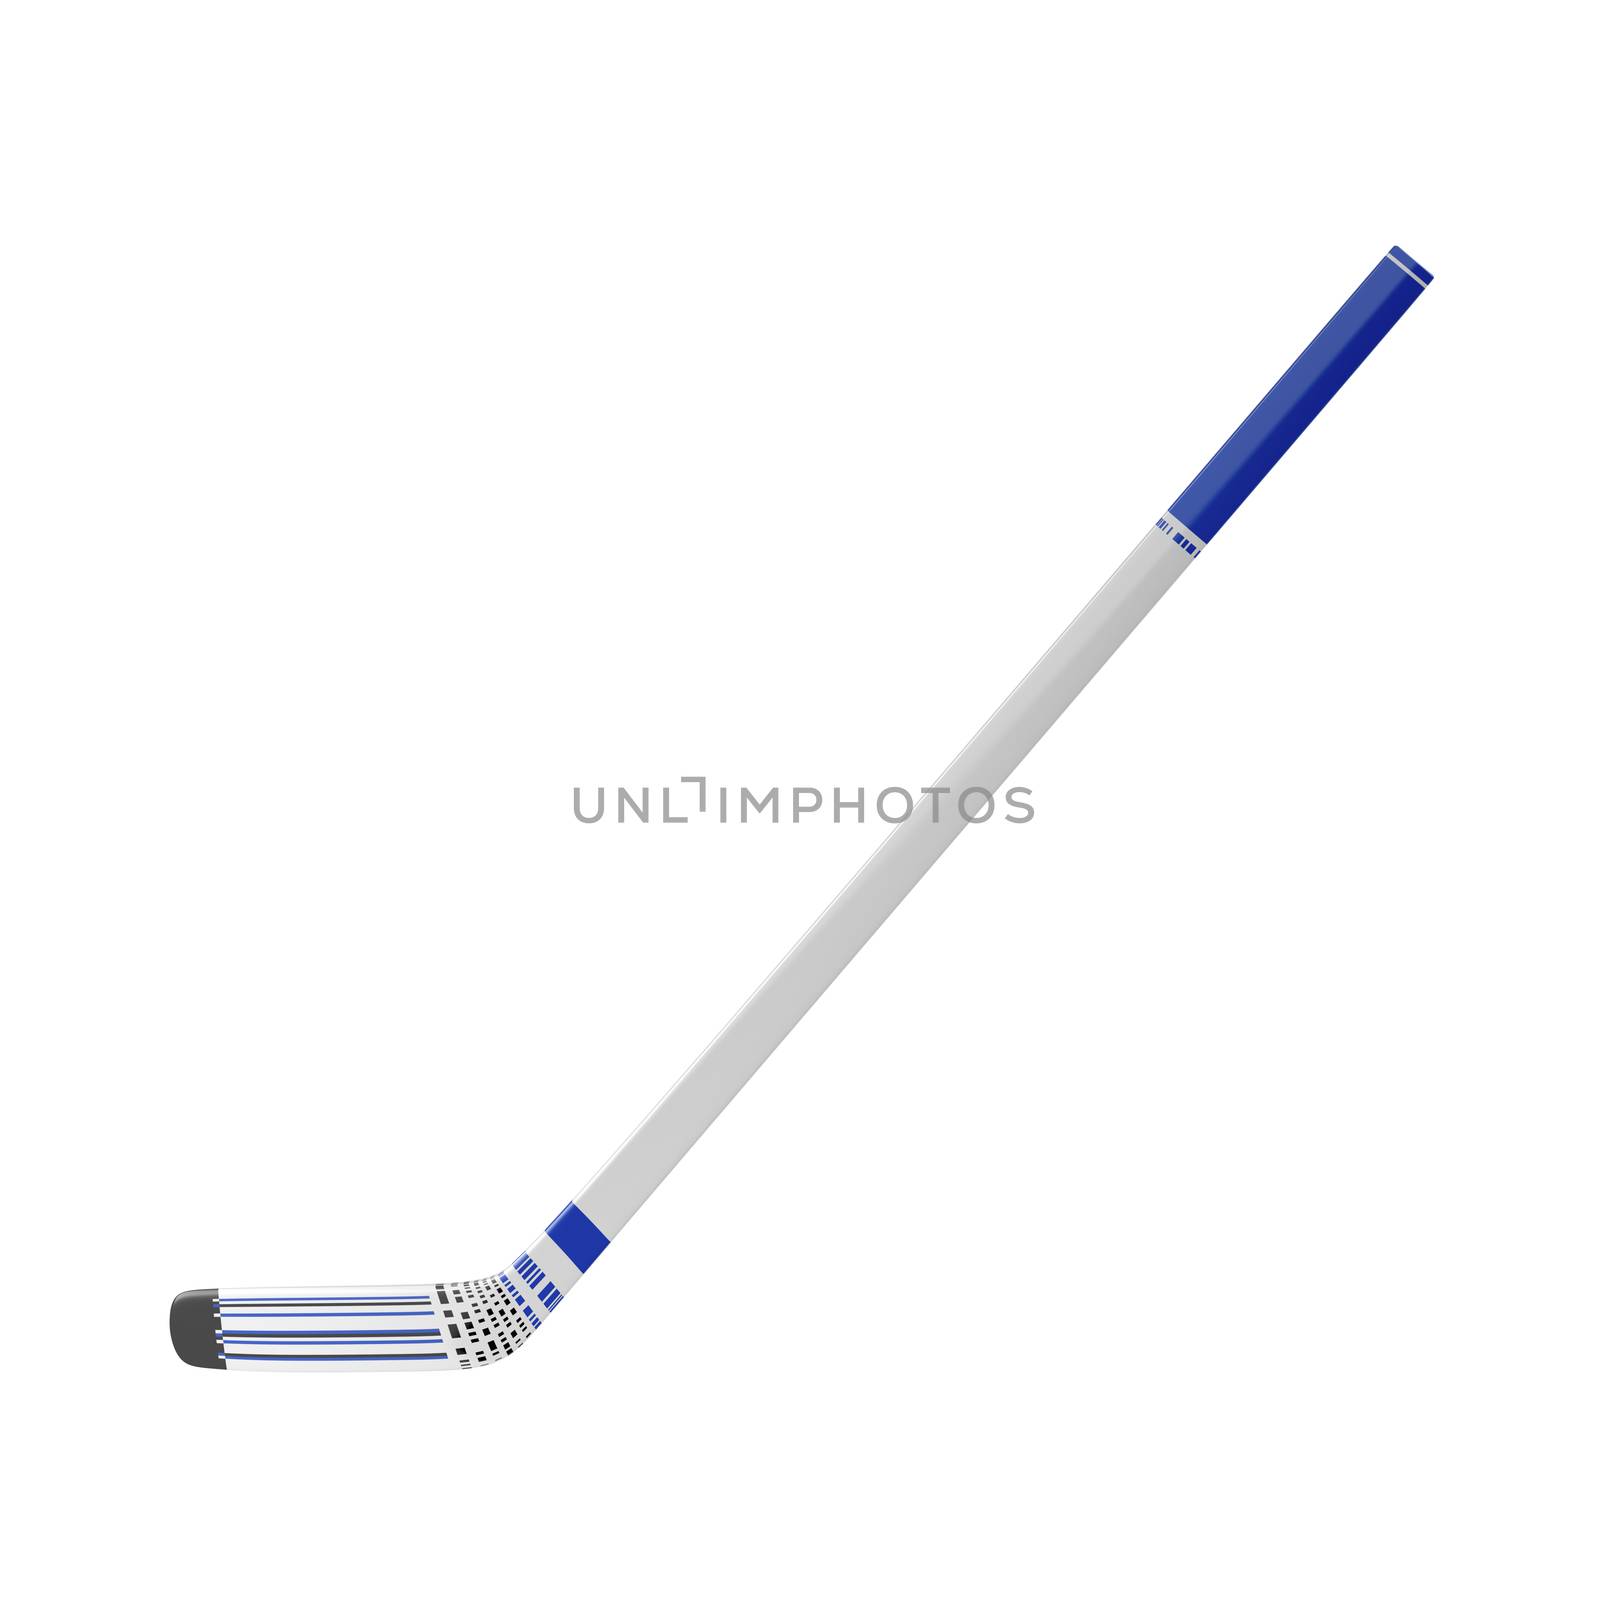 Ice hockey stick by magraphics